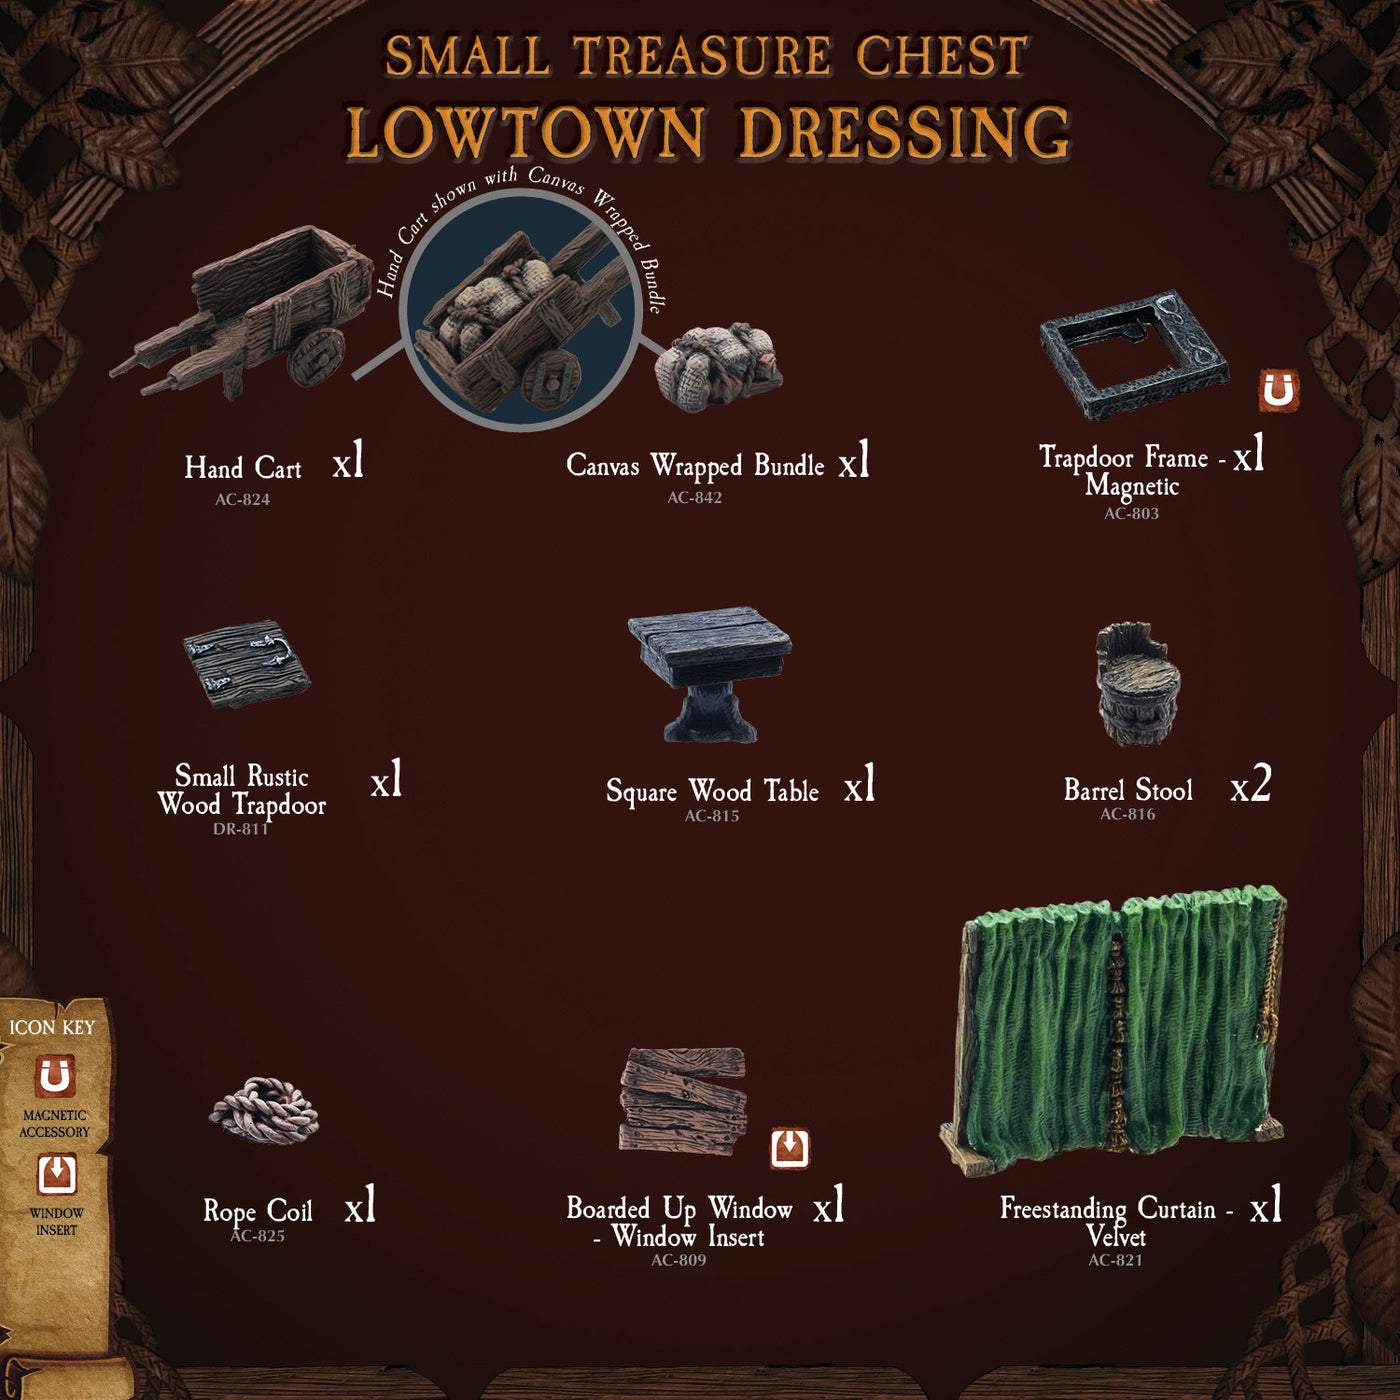 Small Treasure Chest - Lowtown Dressing (Painted)